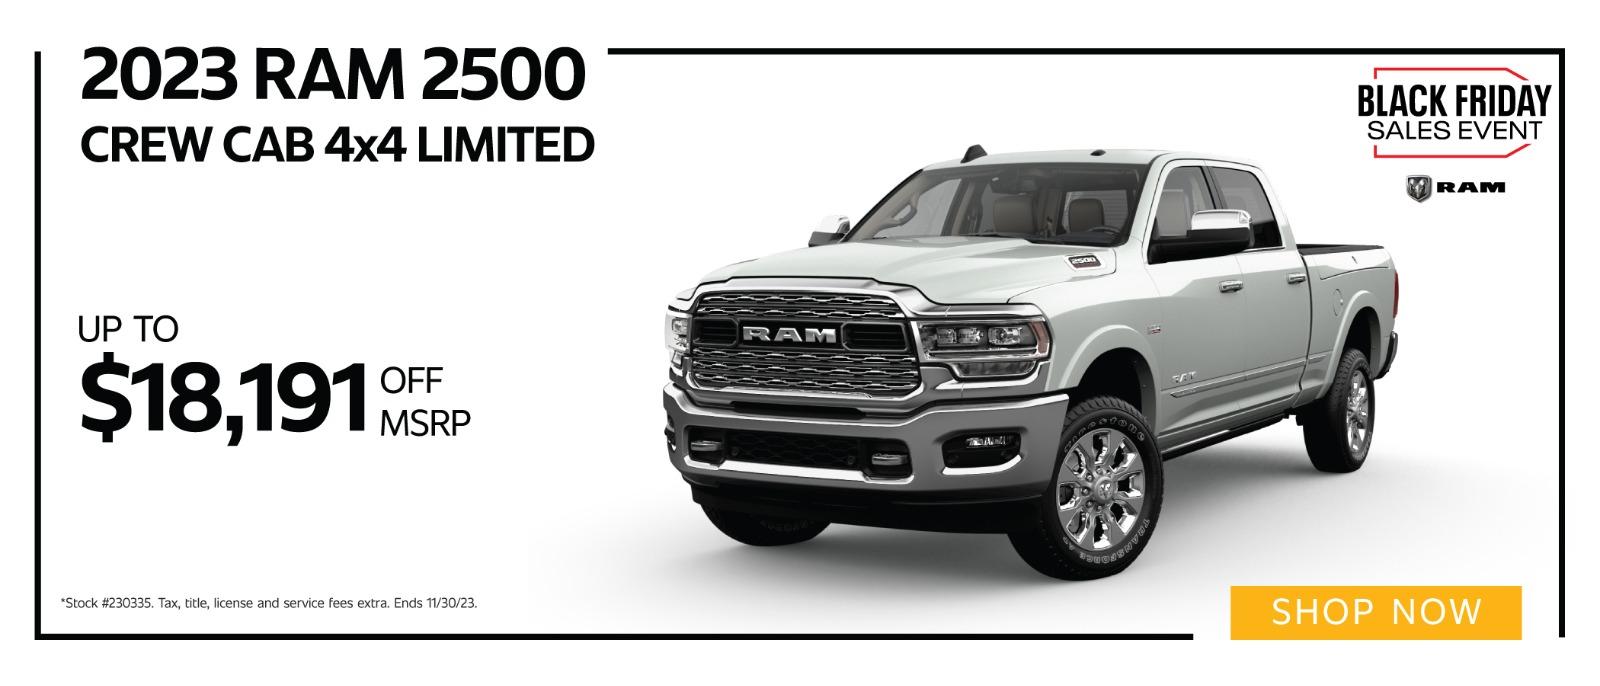 2022 Ram 1500 Crew Cab 4X4 up to $18,191 off MSRP